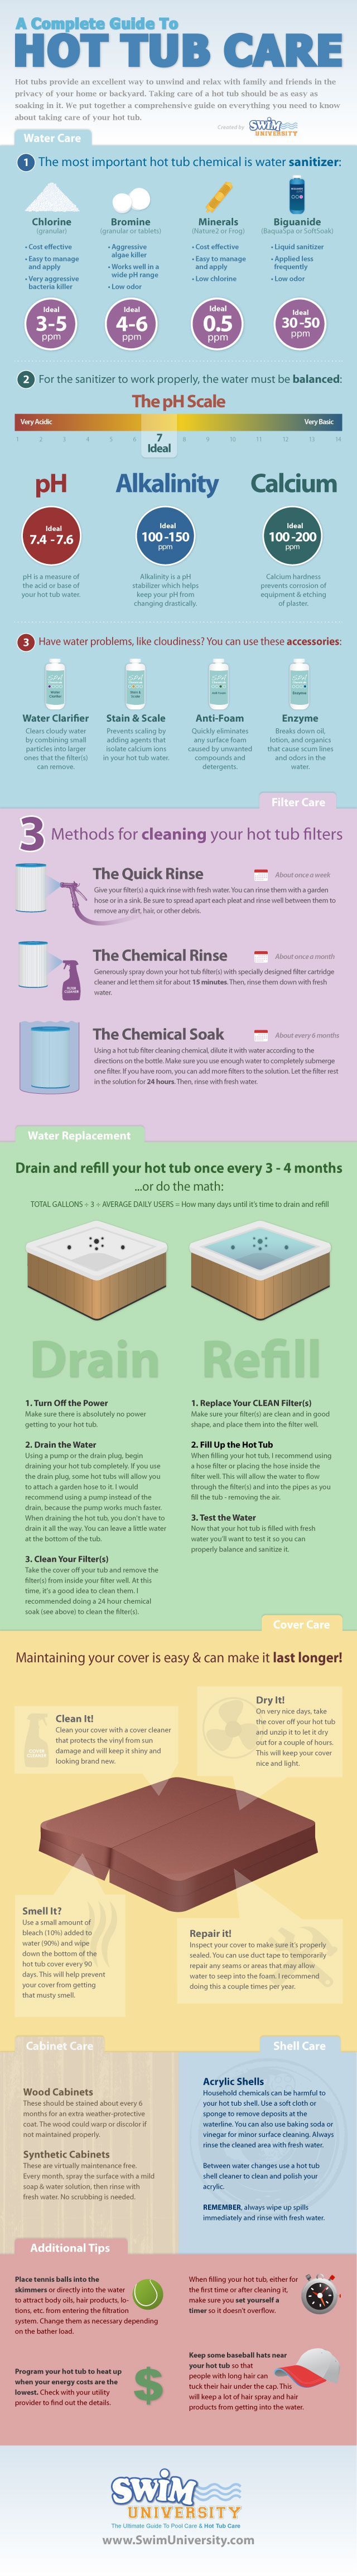 Hot Tub & Spa Care Info-graphic. how to take care of your hot tub spa.    Here is the link:  www.swimuniversit…